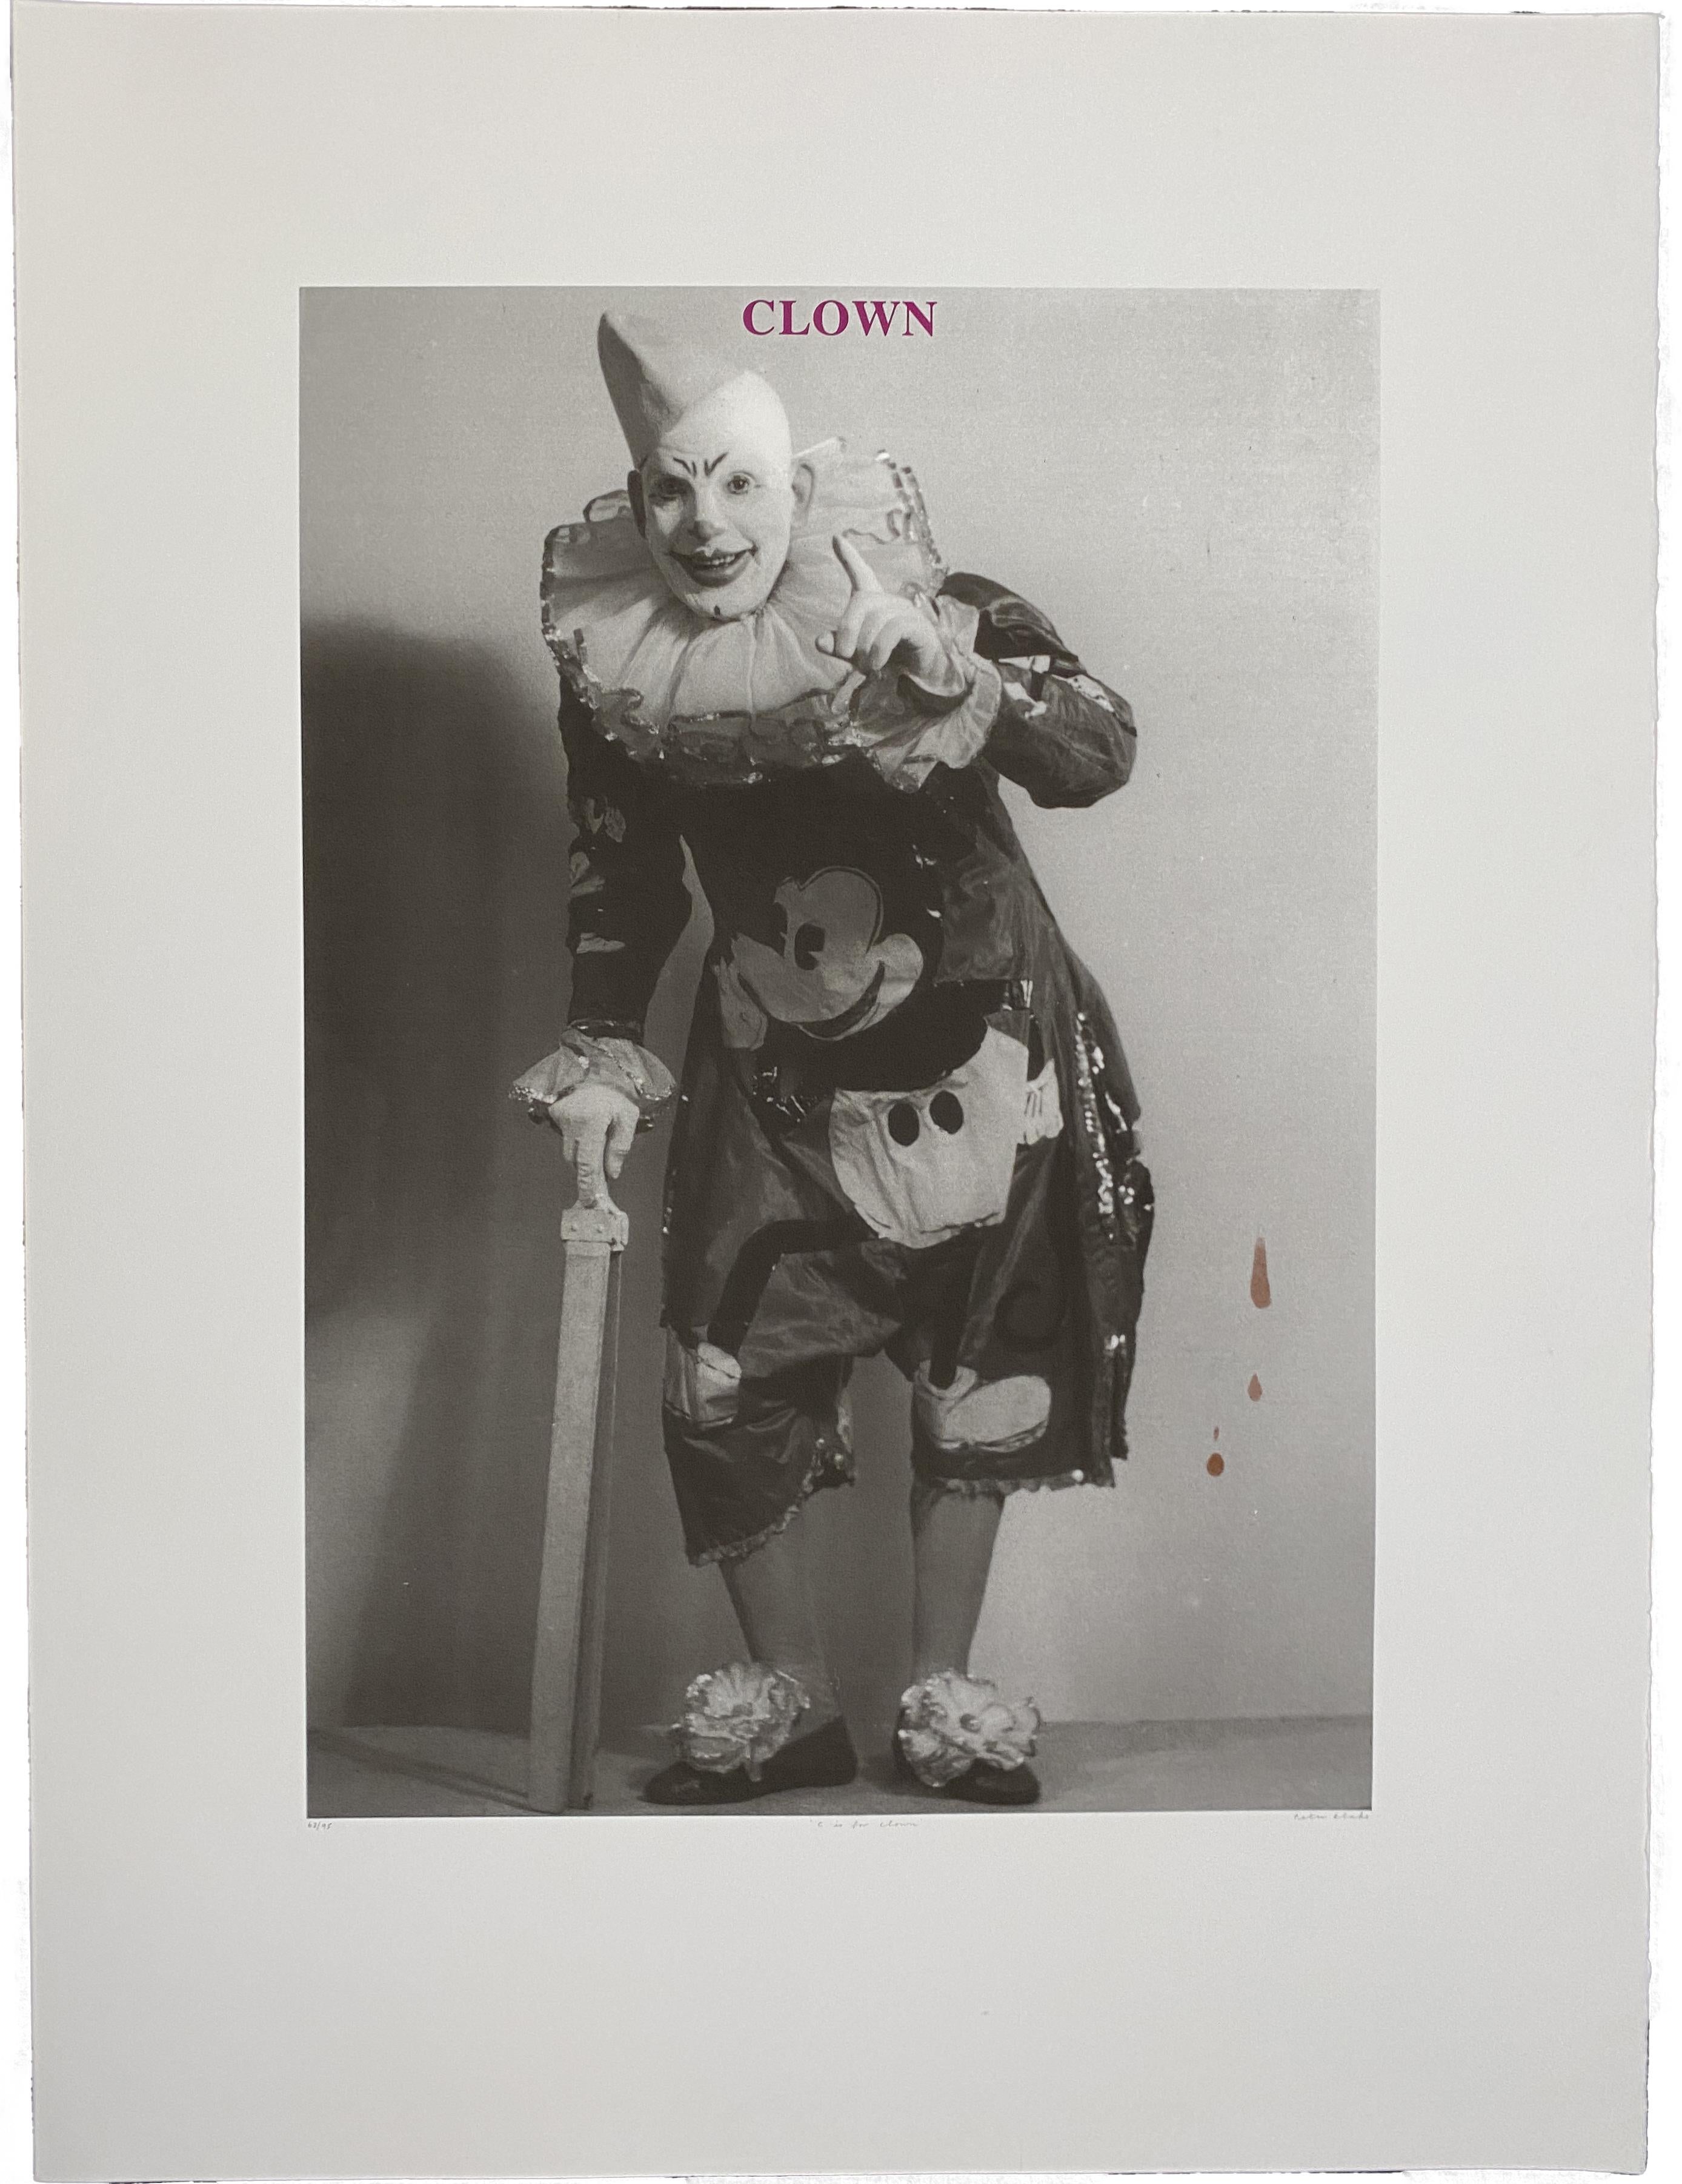 Peter Blake Abstract Print - C is for Clown (Alphabet Series) - 1991 Signed Limited Edition 